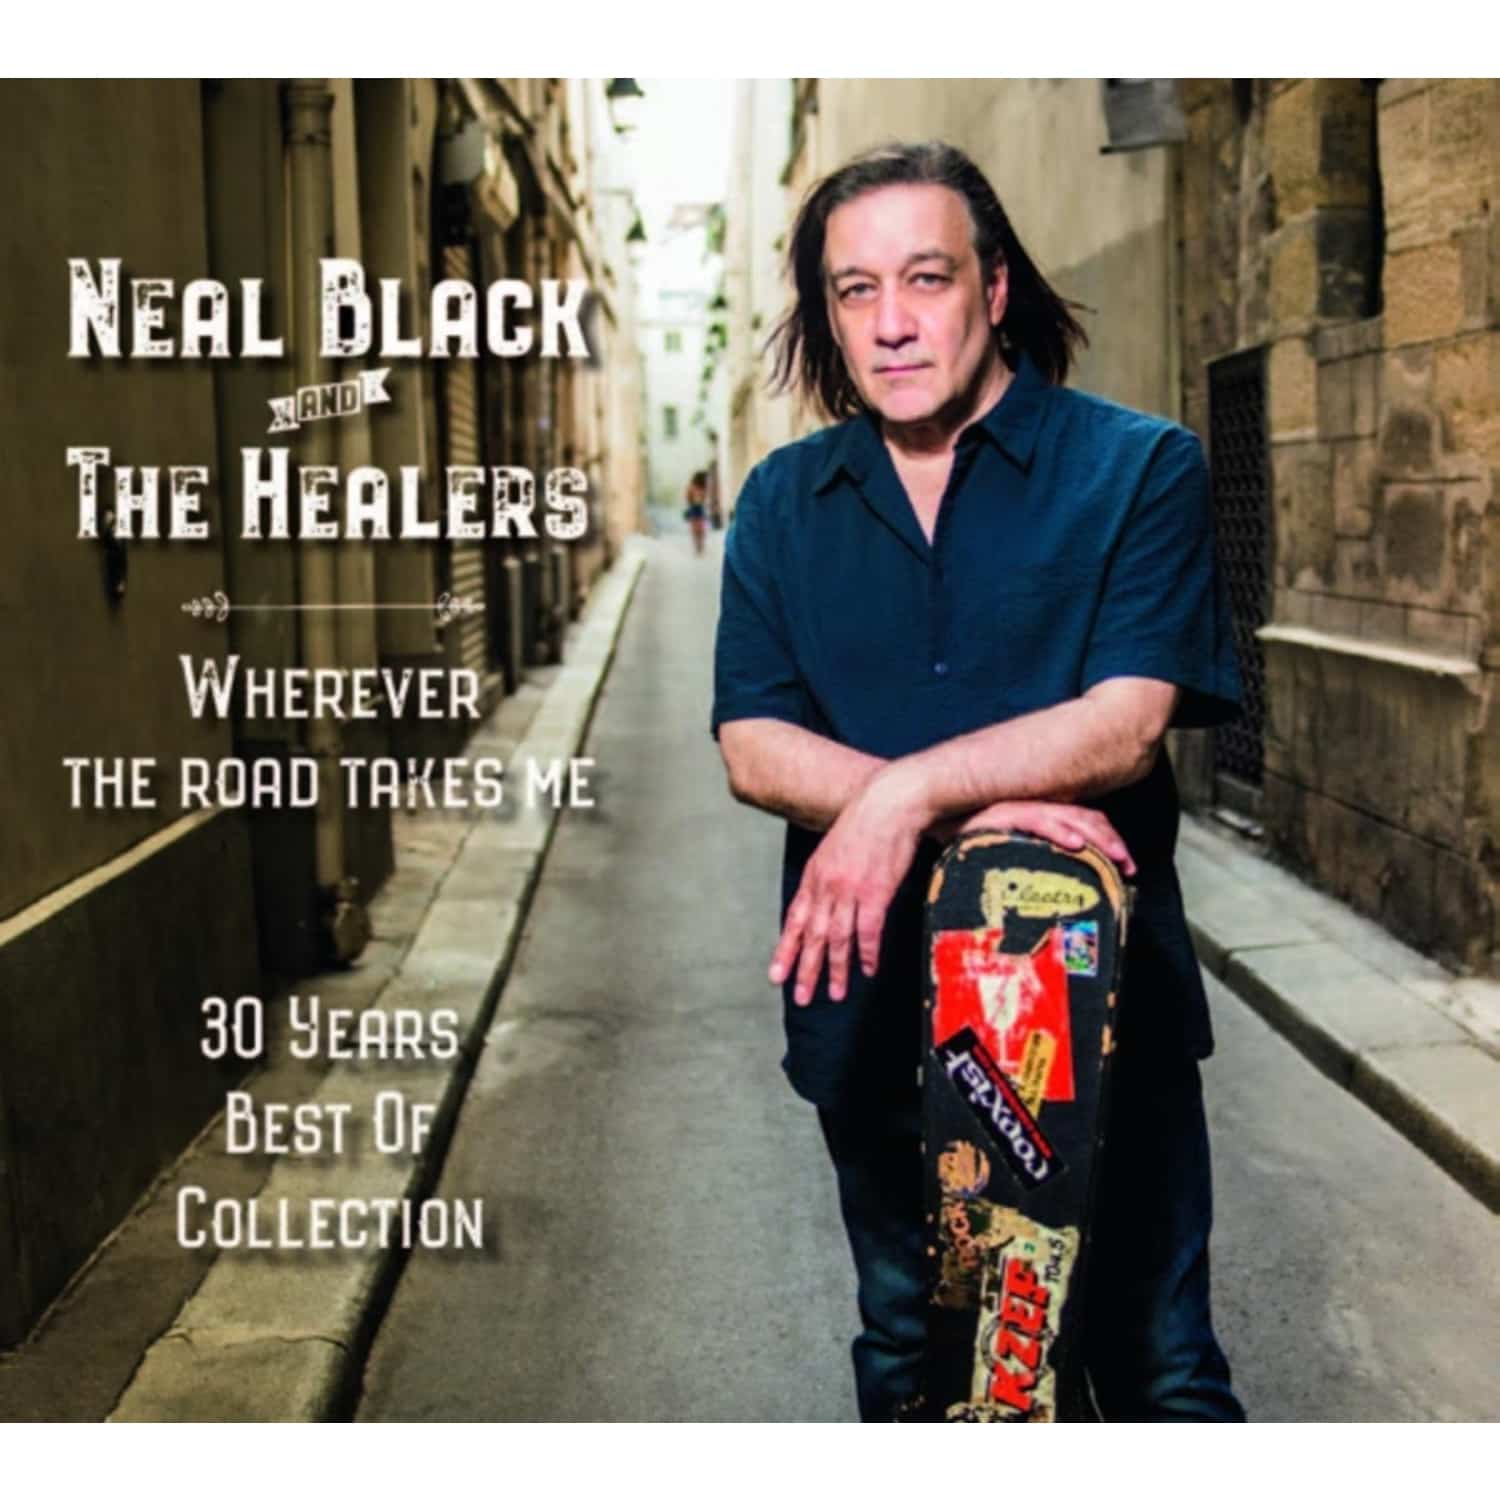 Neal Black & The Healers - WHEREVER THE ROAD TAKES ME 